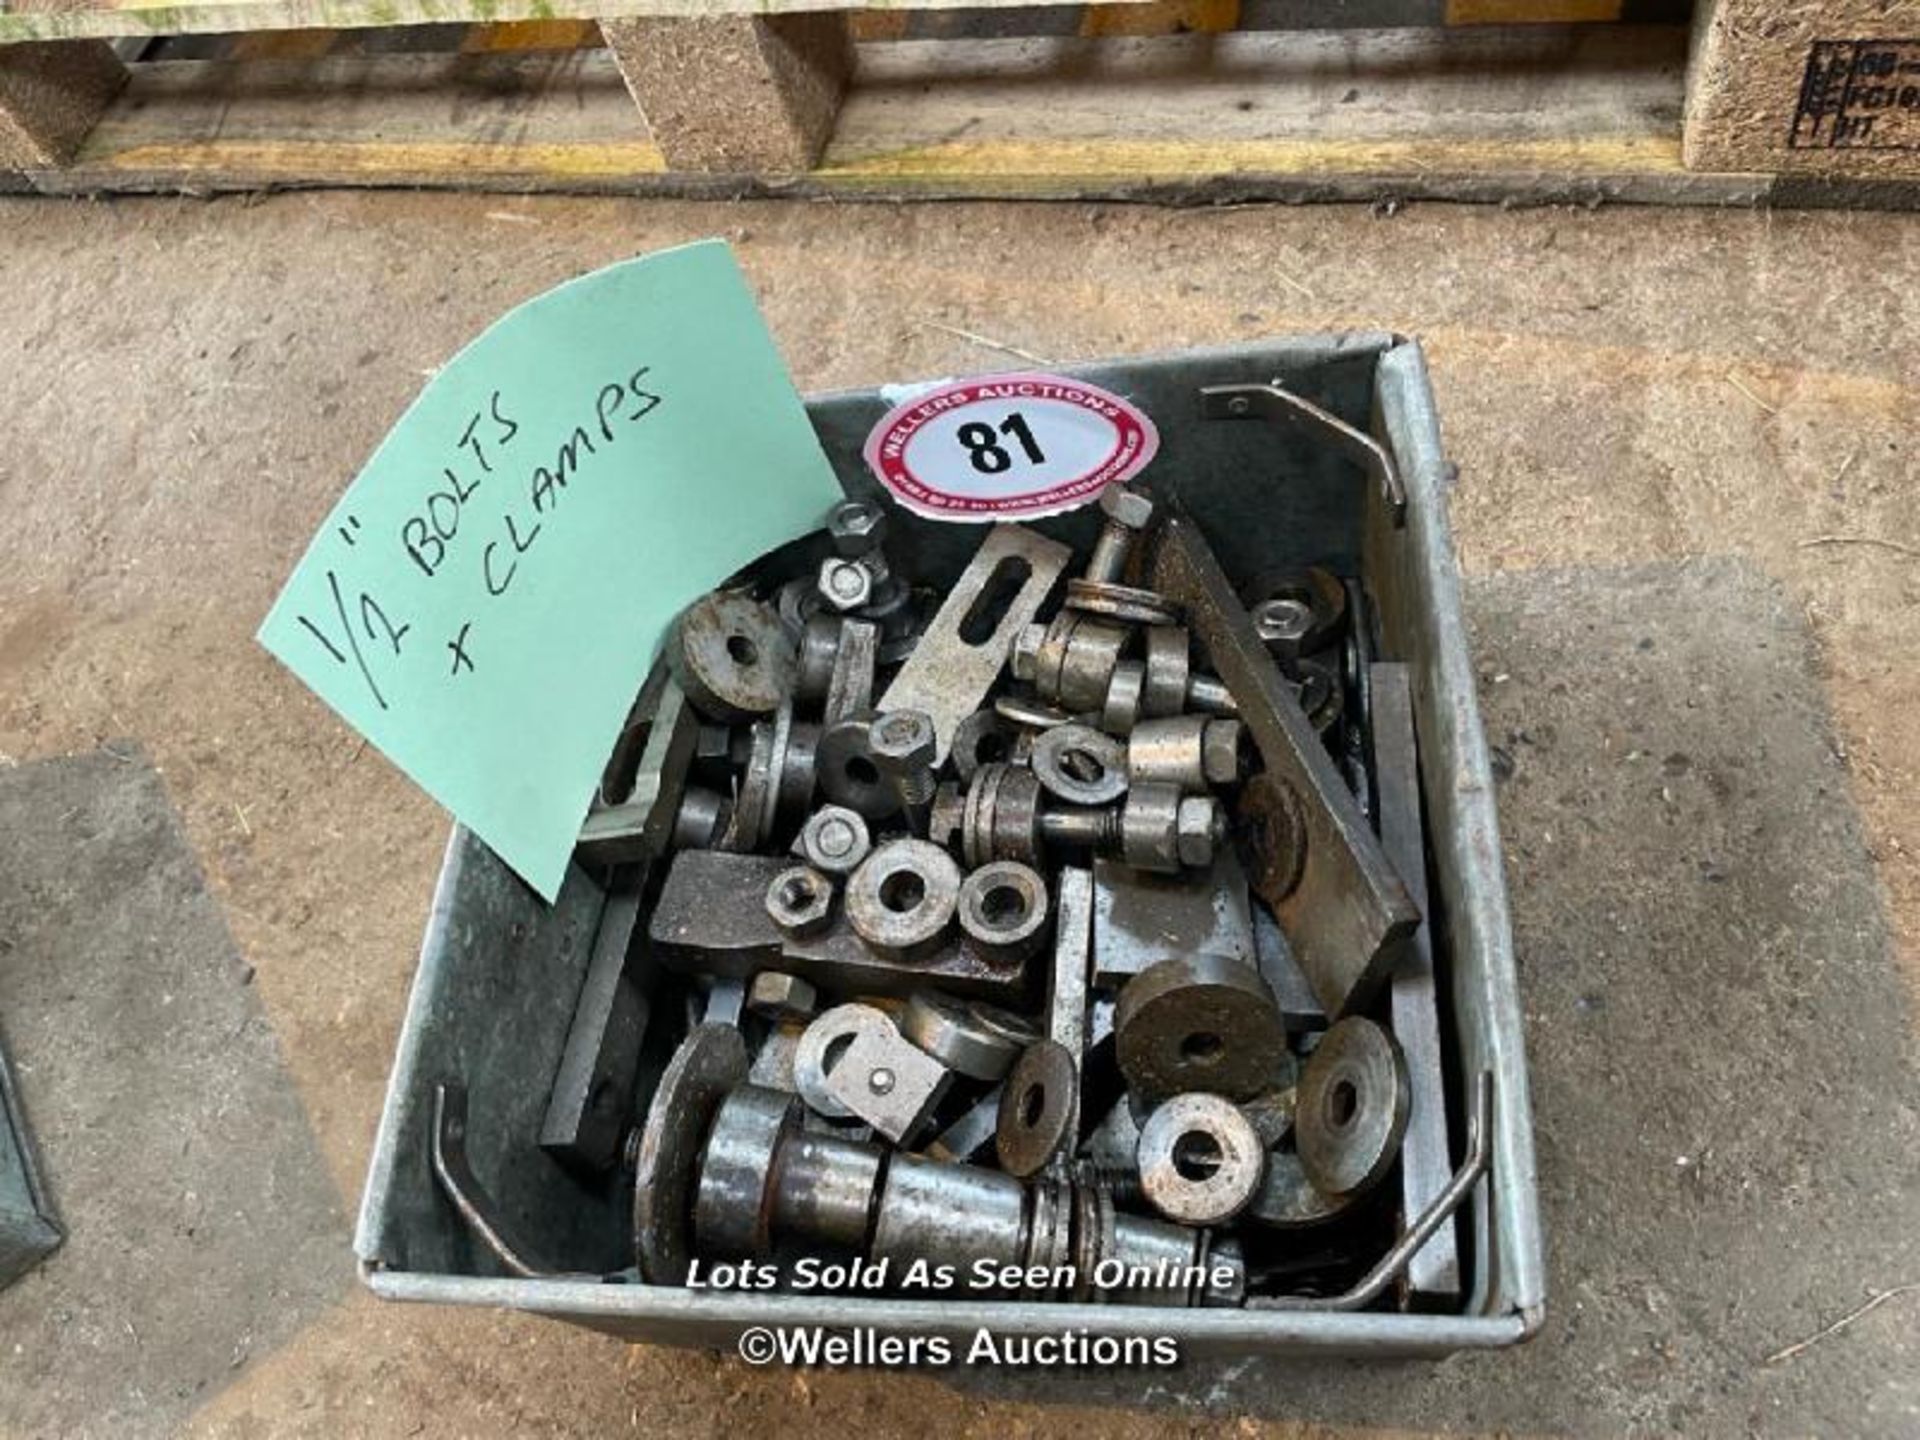 LARGE QUANTITY 1/2" BOLTS AND CLAMPS